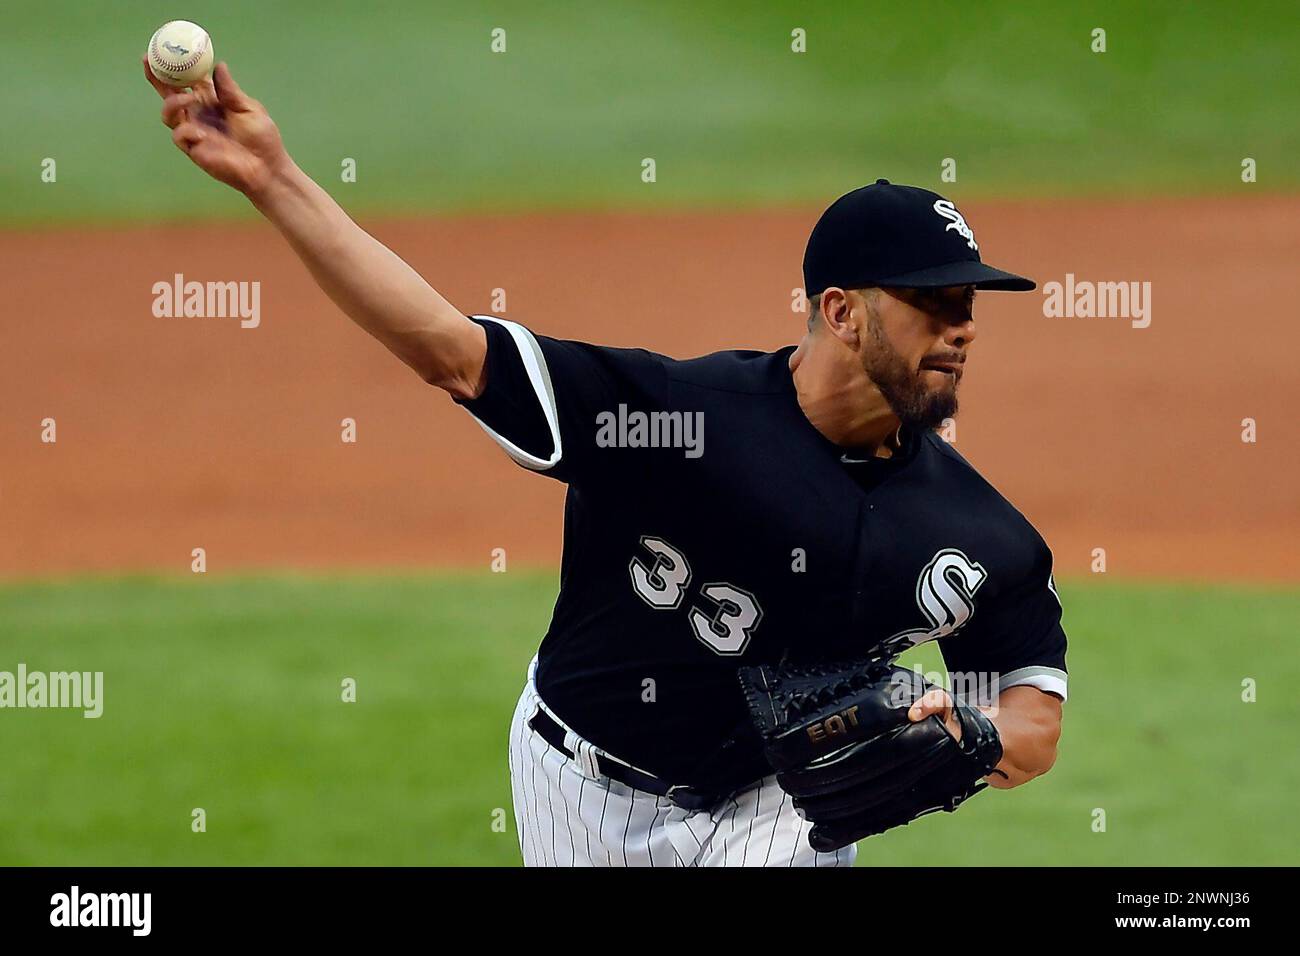 James Shields of the Chicago White Sox delivers the ball against